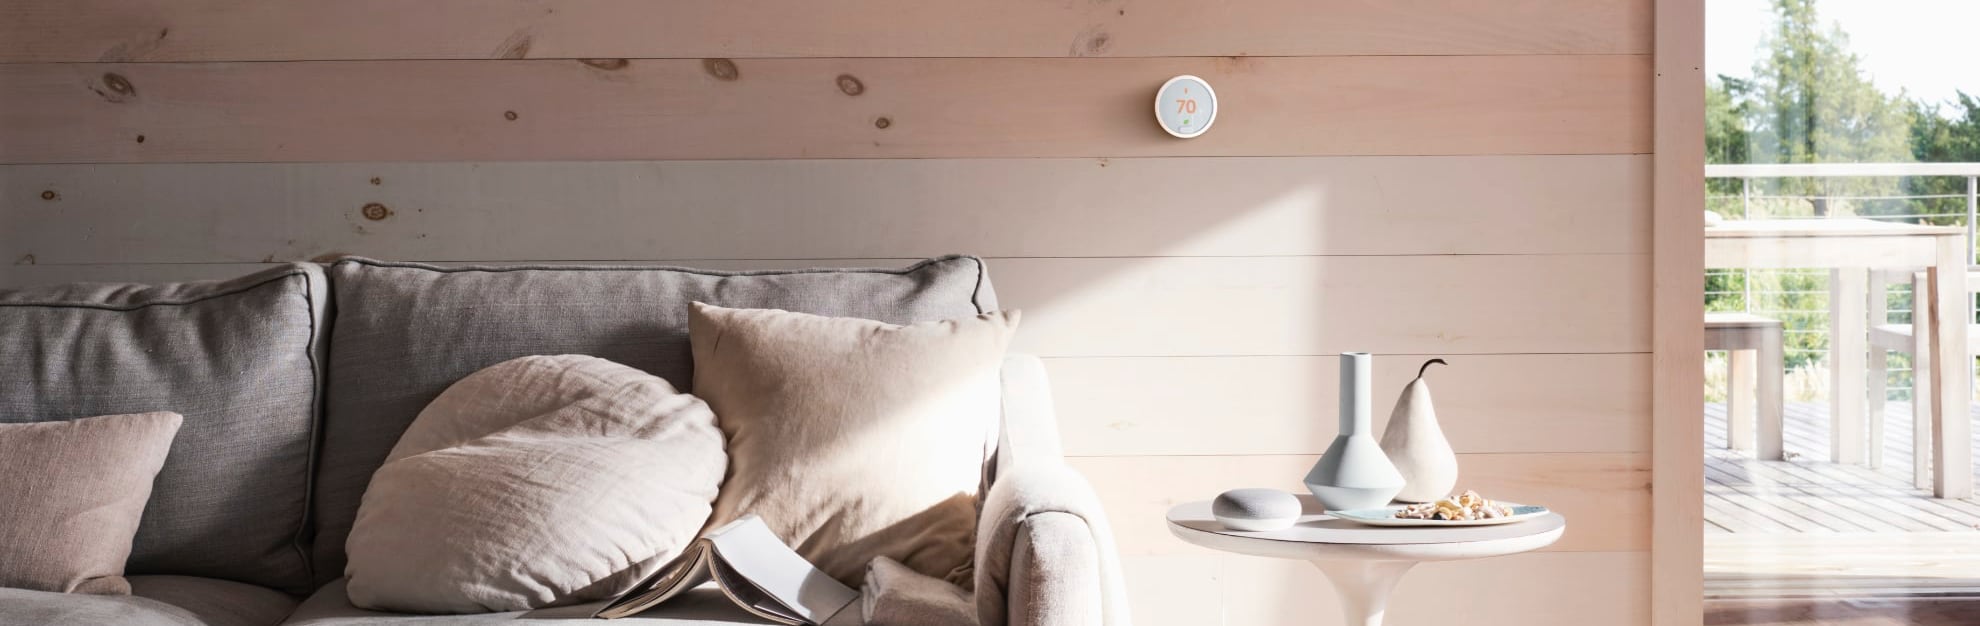 Vivint Home Automation in Asheville